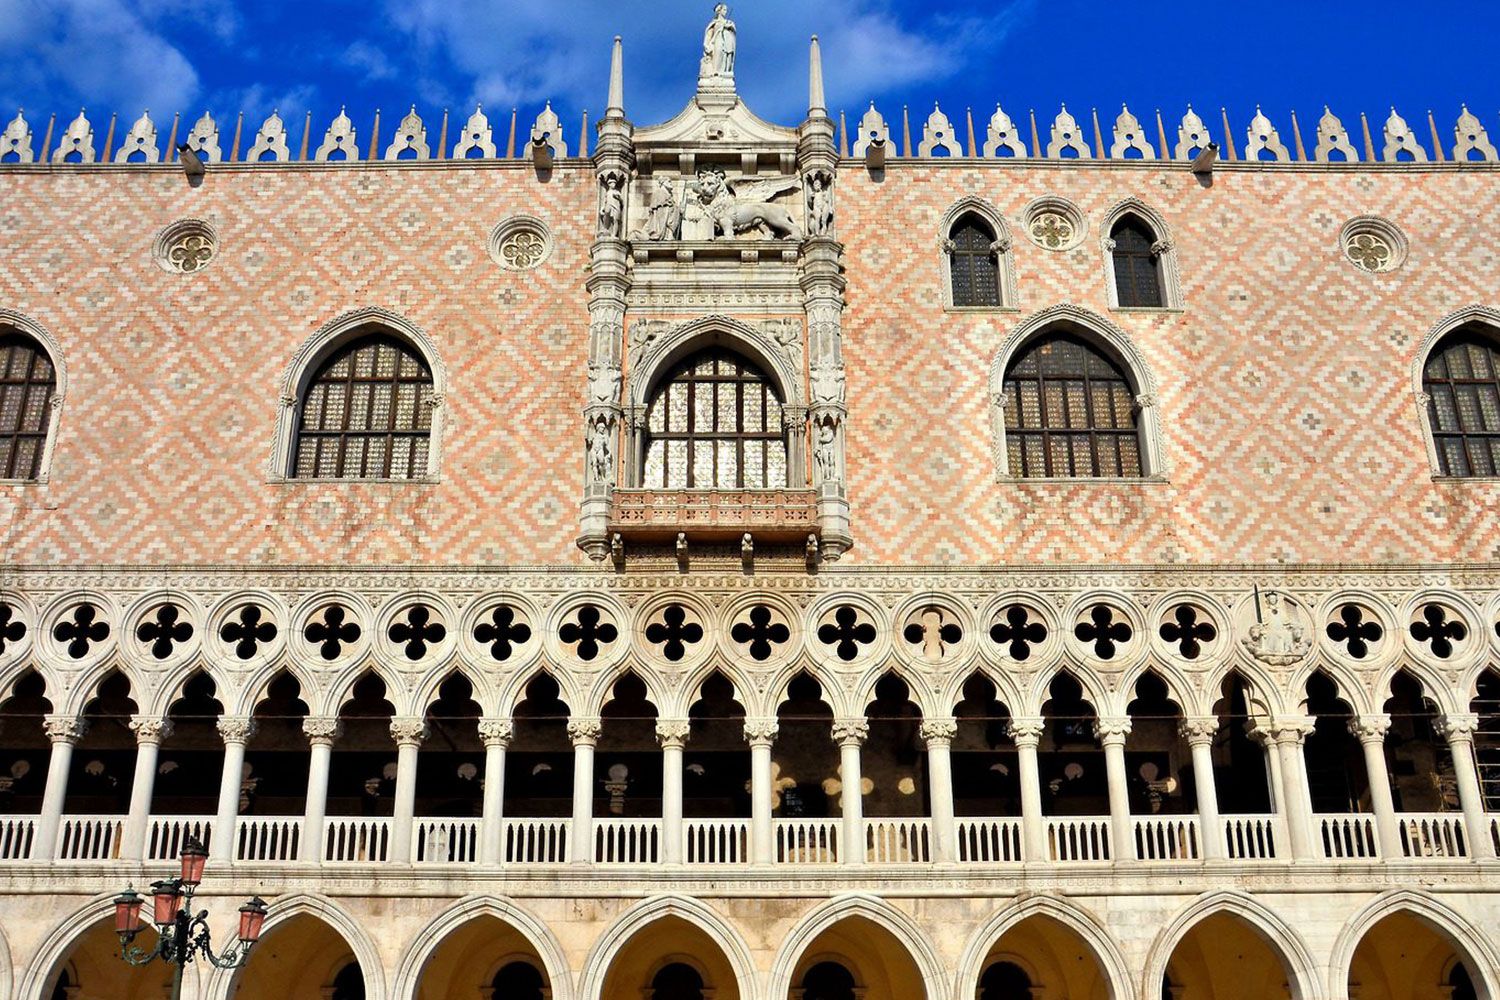 The Doge's Palace in Venice is a miracle in stone